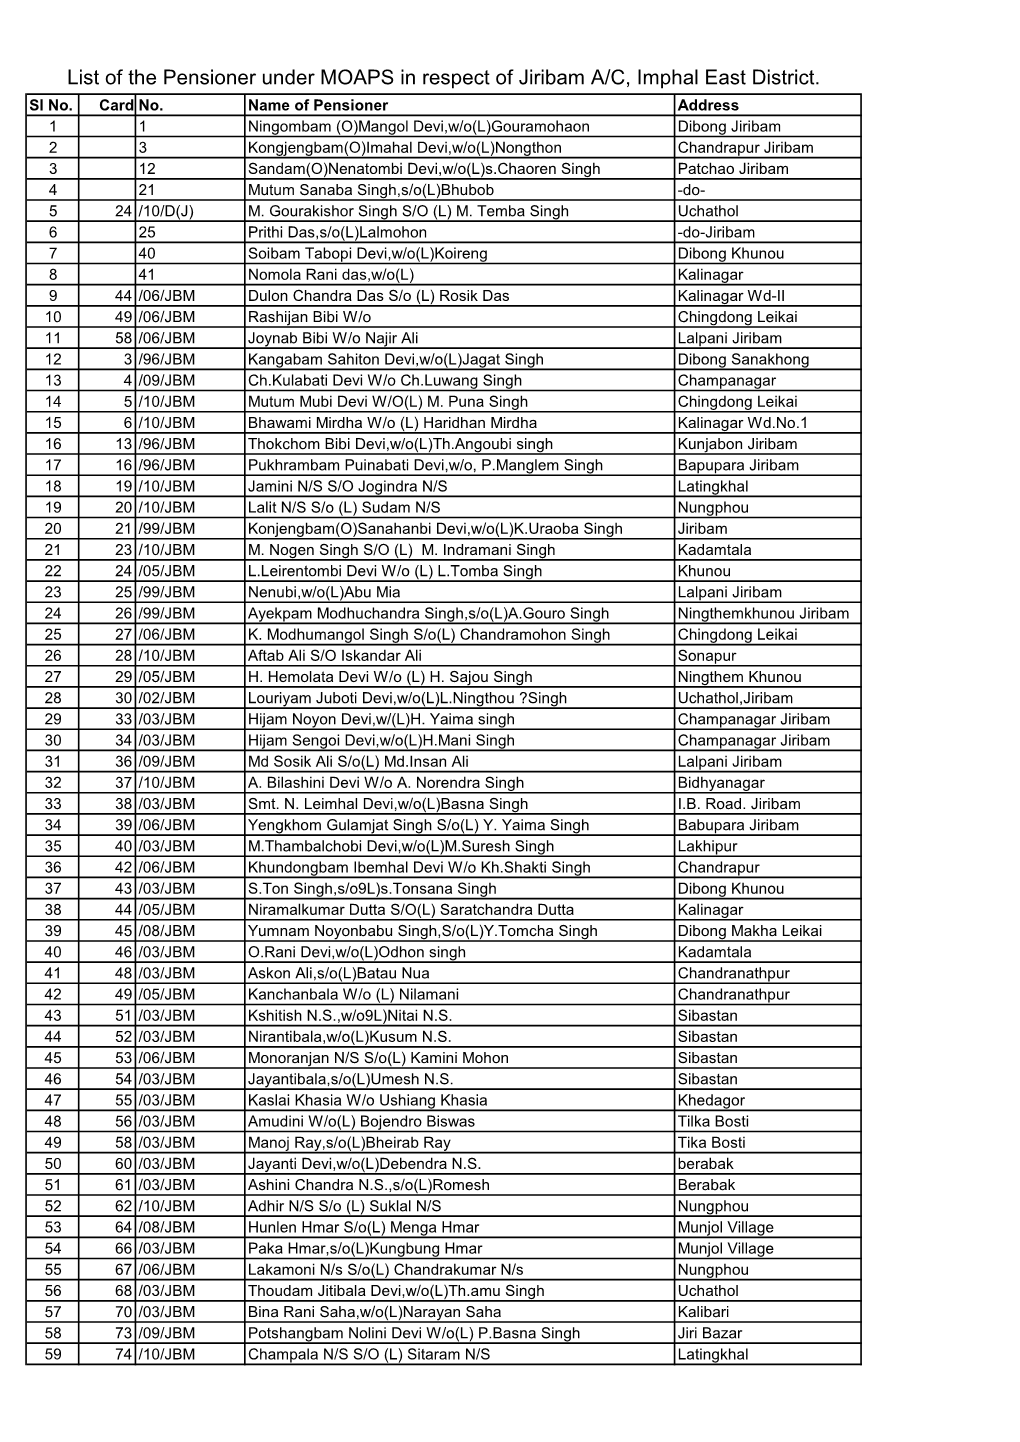 List of the Pensioner Under MOAPS in Respect of Jiribam A/C, Imphal East District